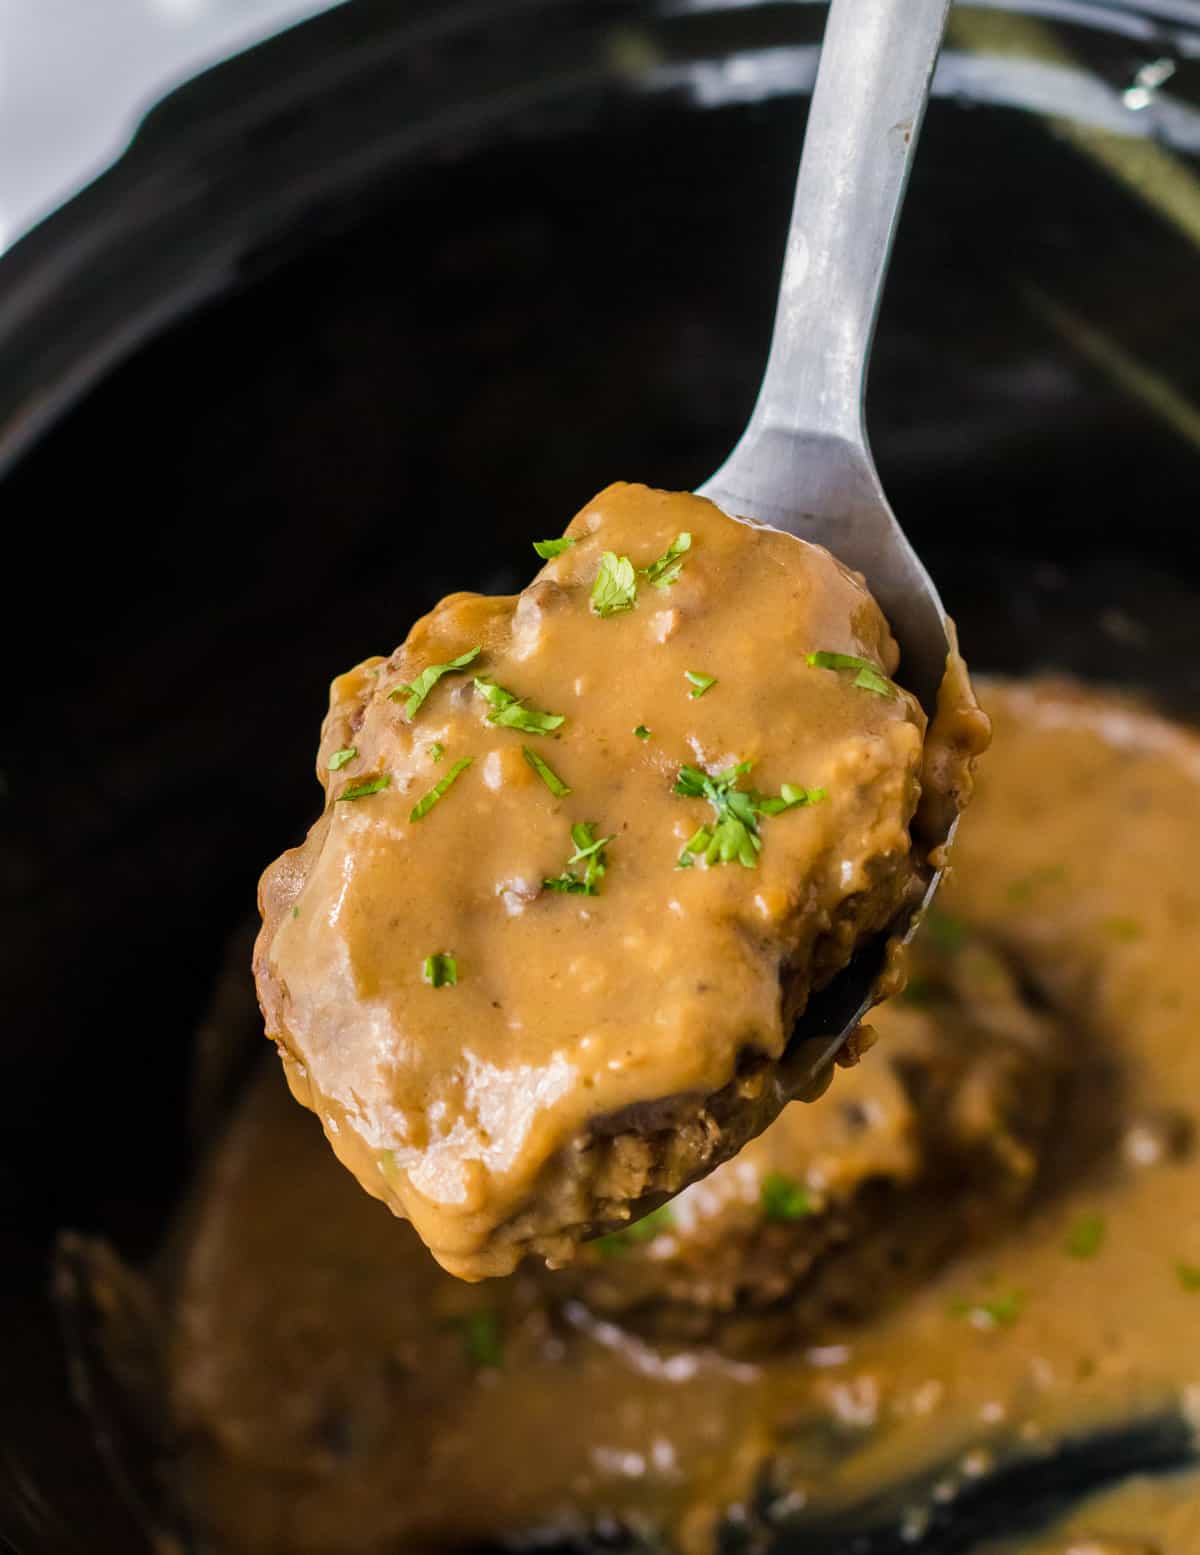 Serving spoon lifting gravy smothered salisbury steak patty out of crockpot.